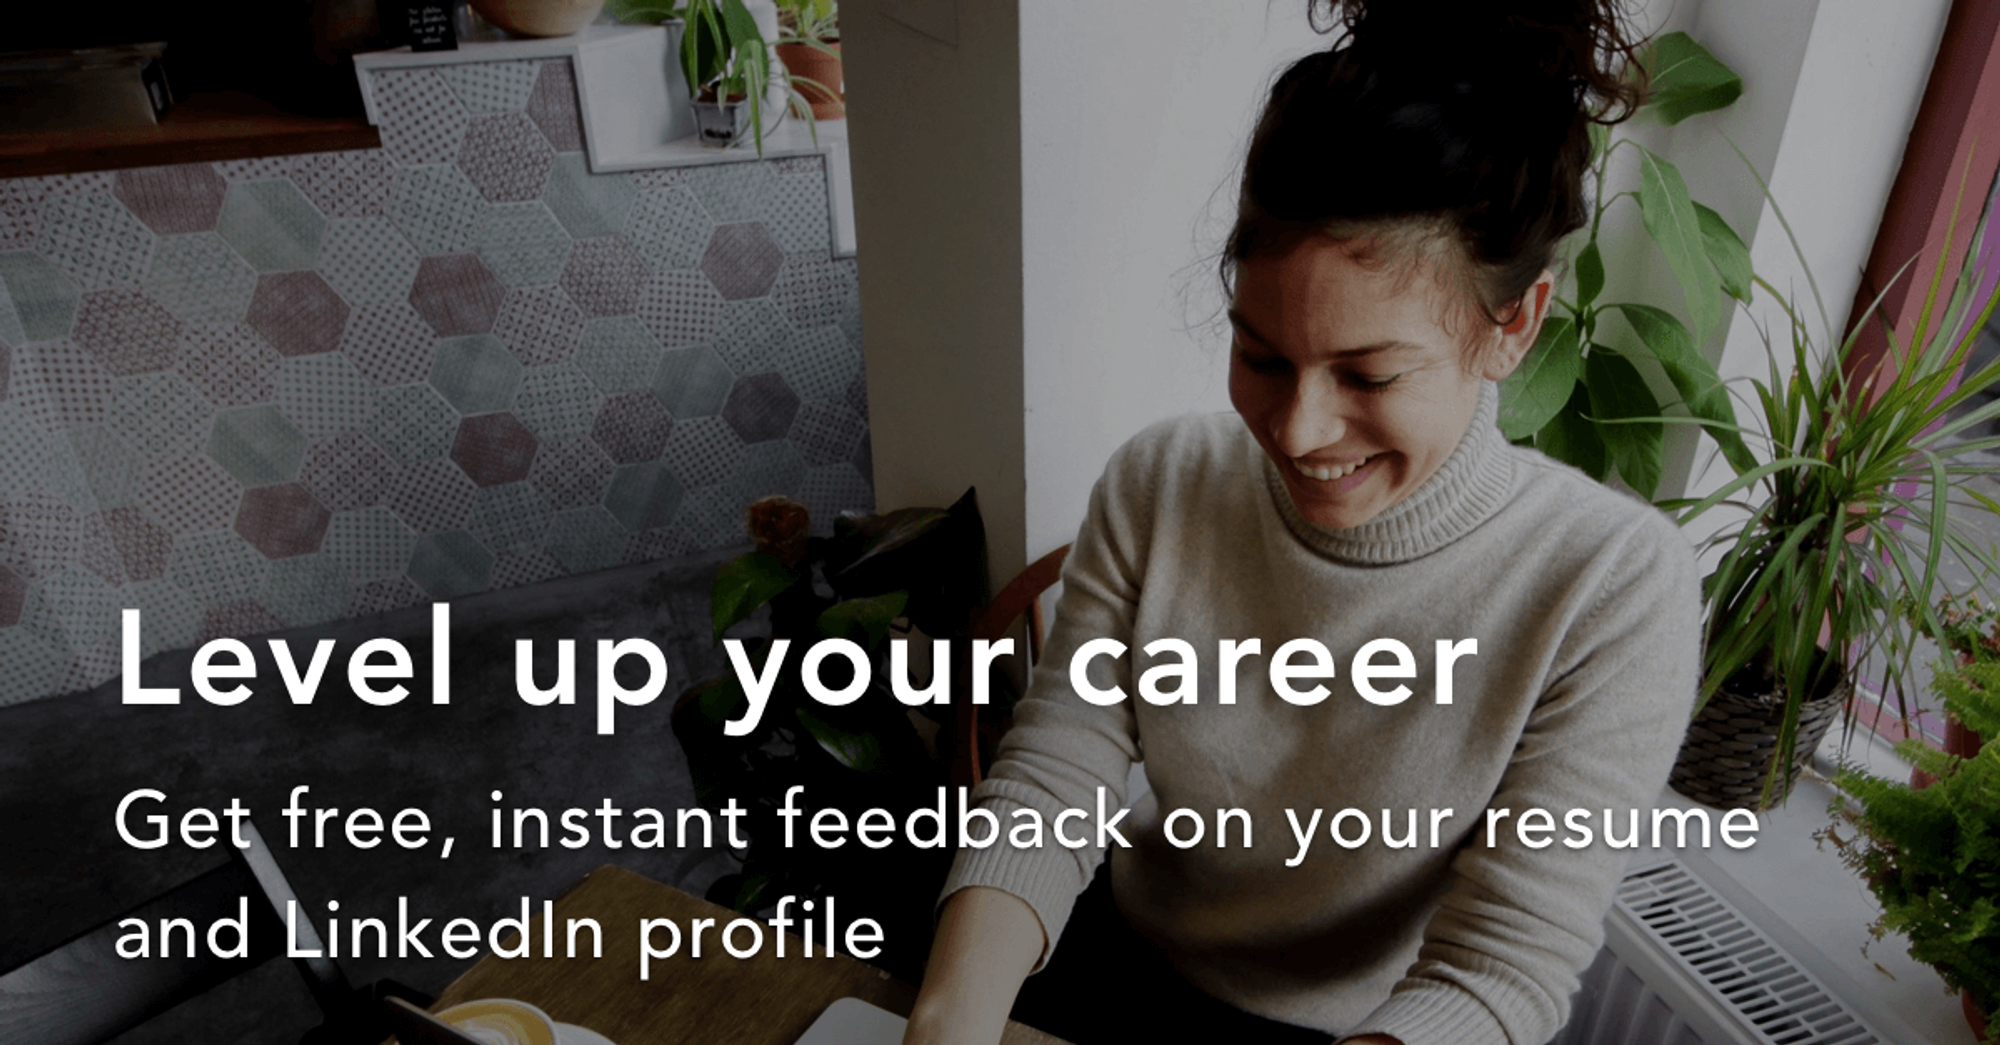 Resume Worded - Free instant feedback on your resume and LinkedIn profile